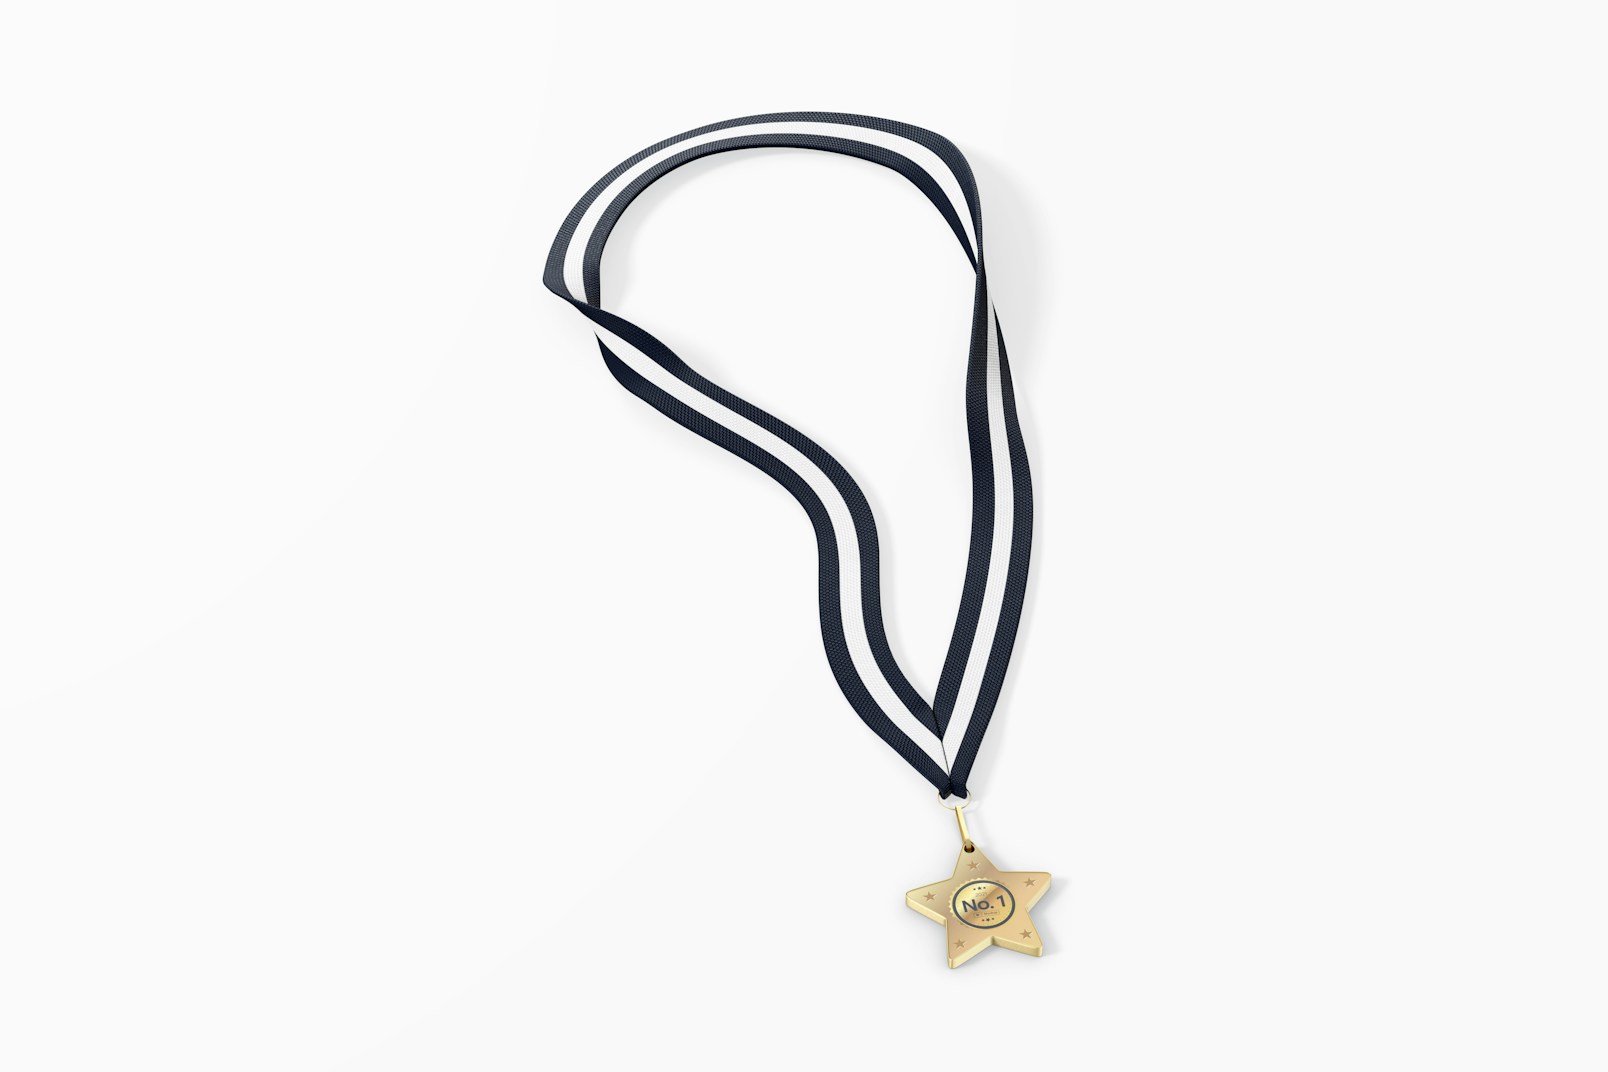 Star Competition Medal with Ribbon Mockup